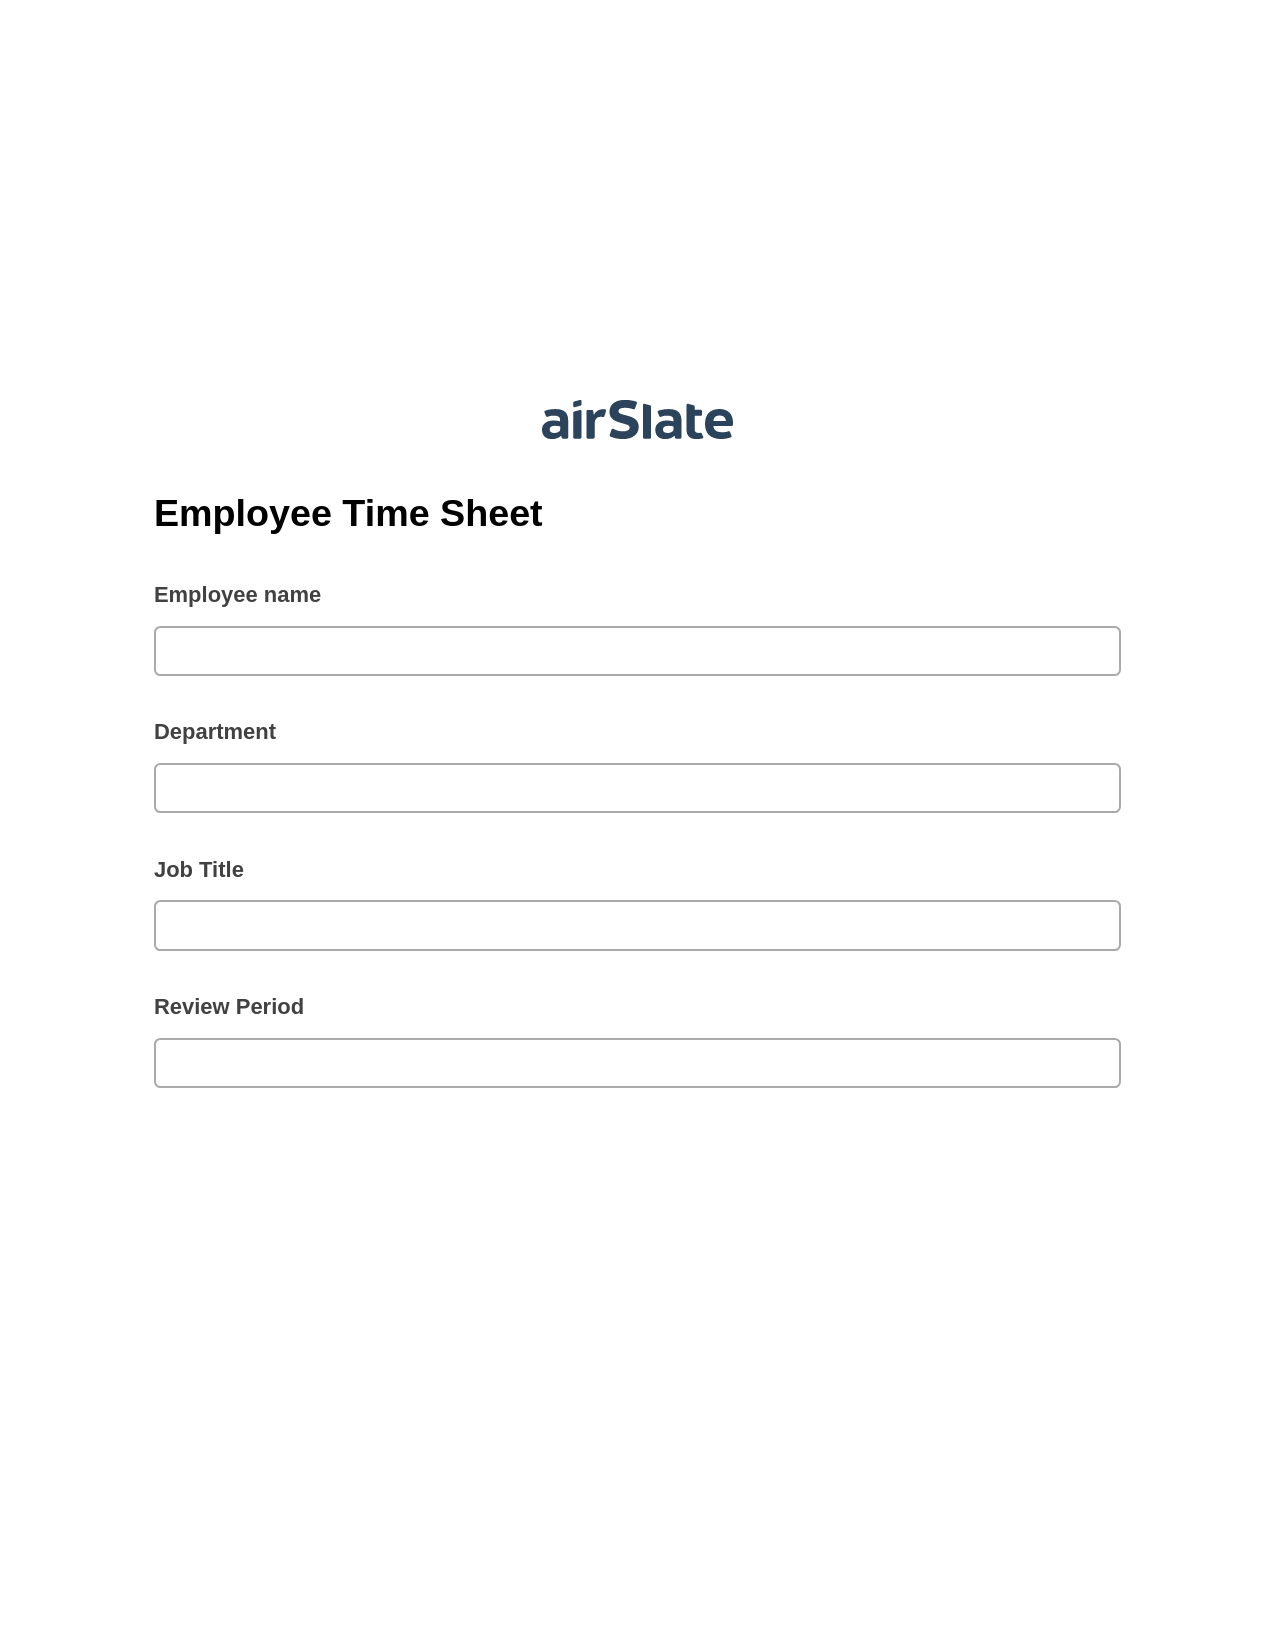 Employee Time Sheet Pre-fill from Salesforce Records Bot, Update Audit Trail Bot, Export to Excel 365 Bot